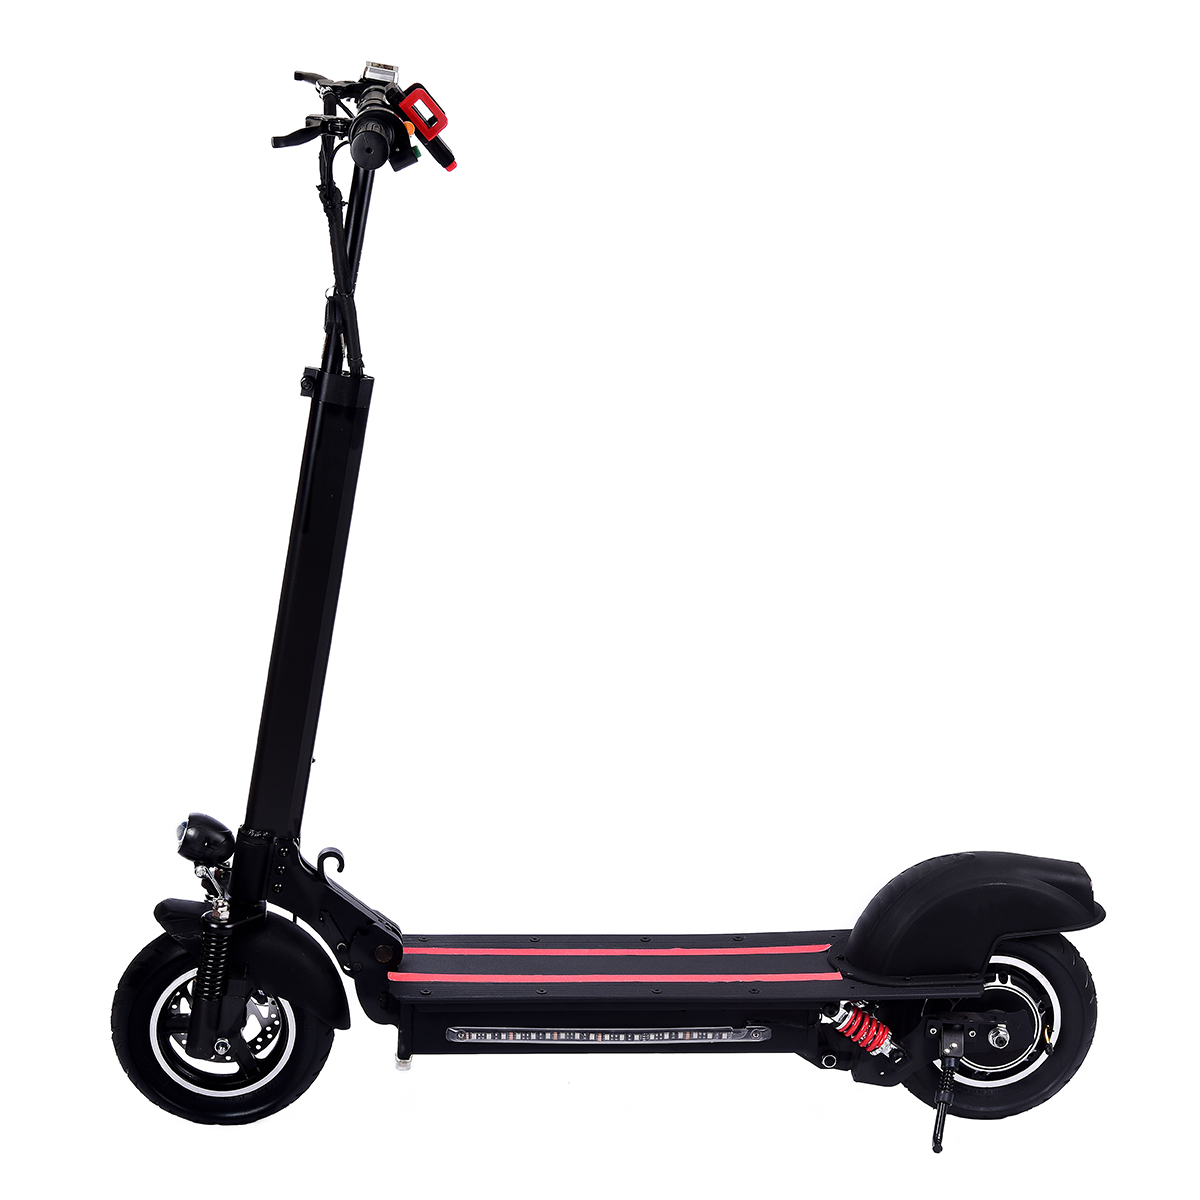 Find EU Direct Lamtwheel 48V 12Ah 600W Electric Scooter 10 inch 35KM Max Mileage 120KG Max Load E Scooter for Sale on Gipsybee.com with cryptocurrencies